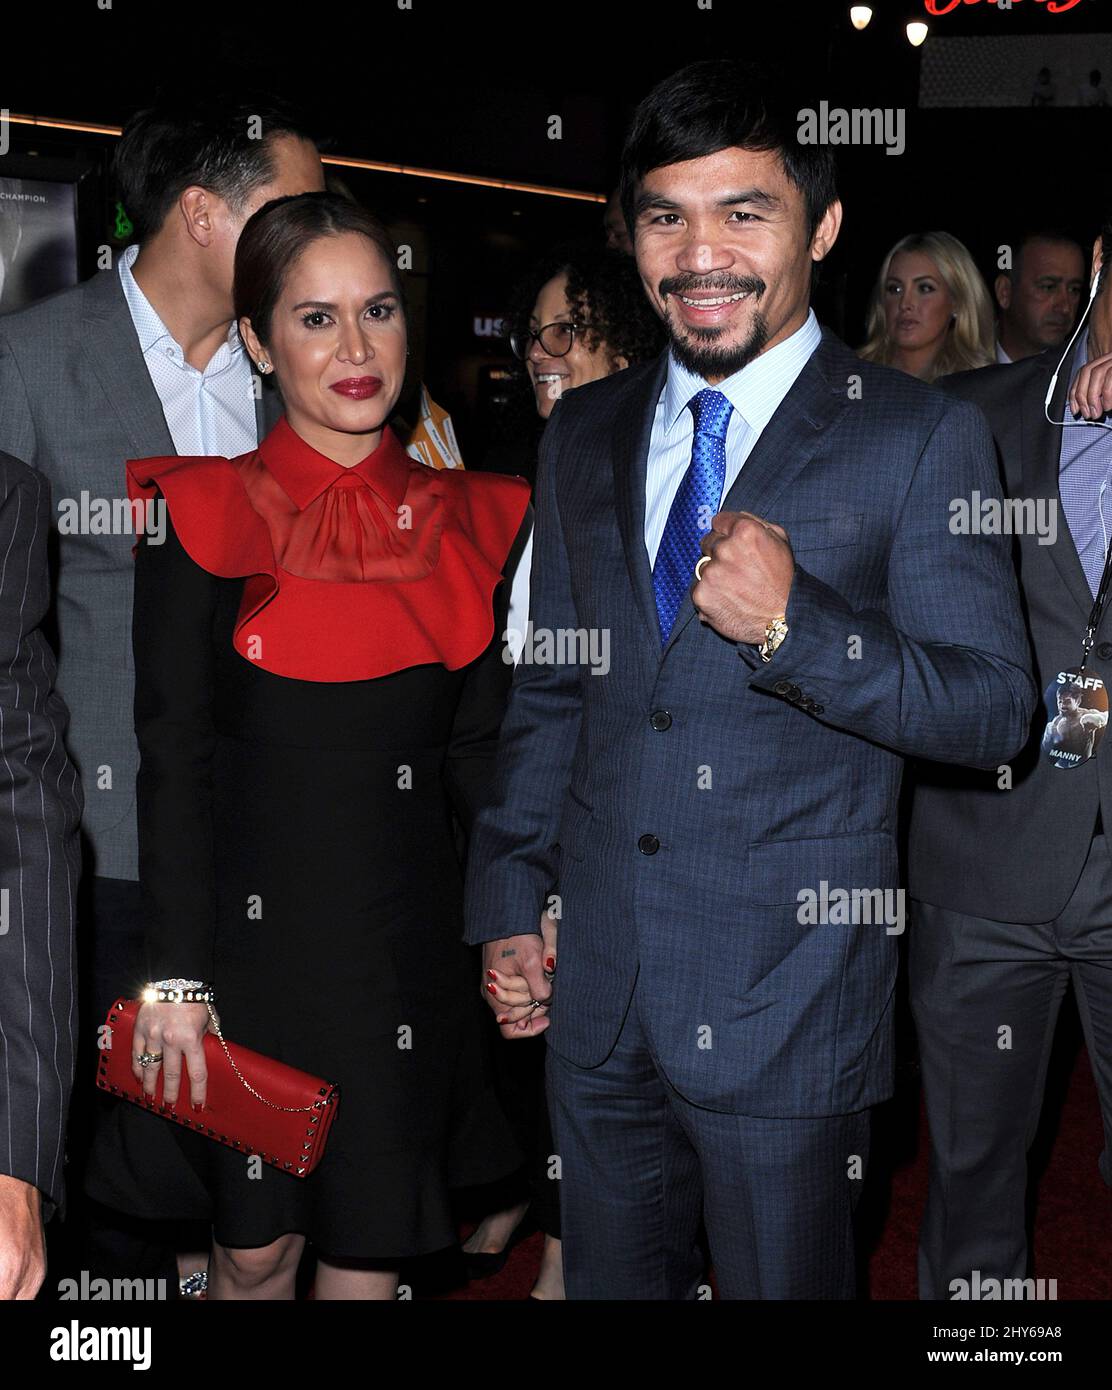 Manny Pacquiao, Jinkee Pacquiao arriving for the Manny premiere held at TCL Chinese Theater, Los Angeles. Stock Photo